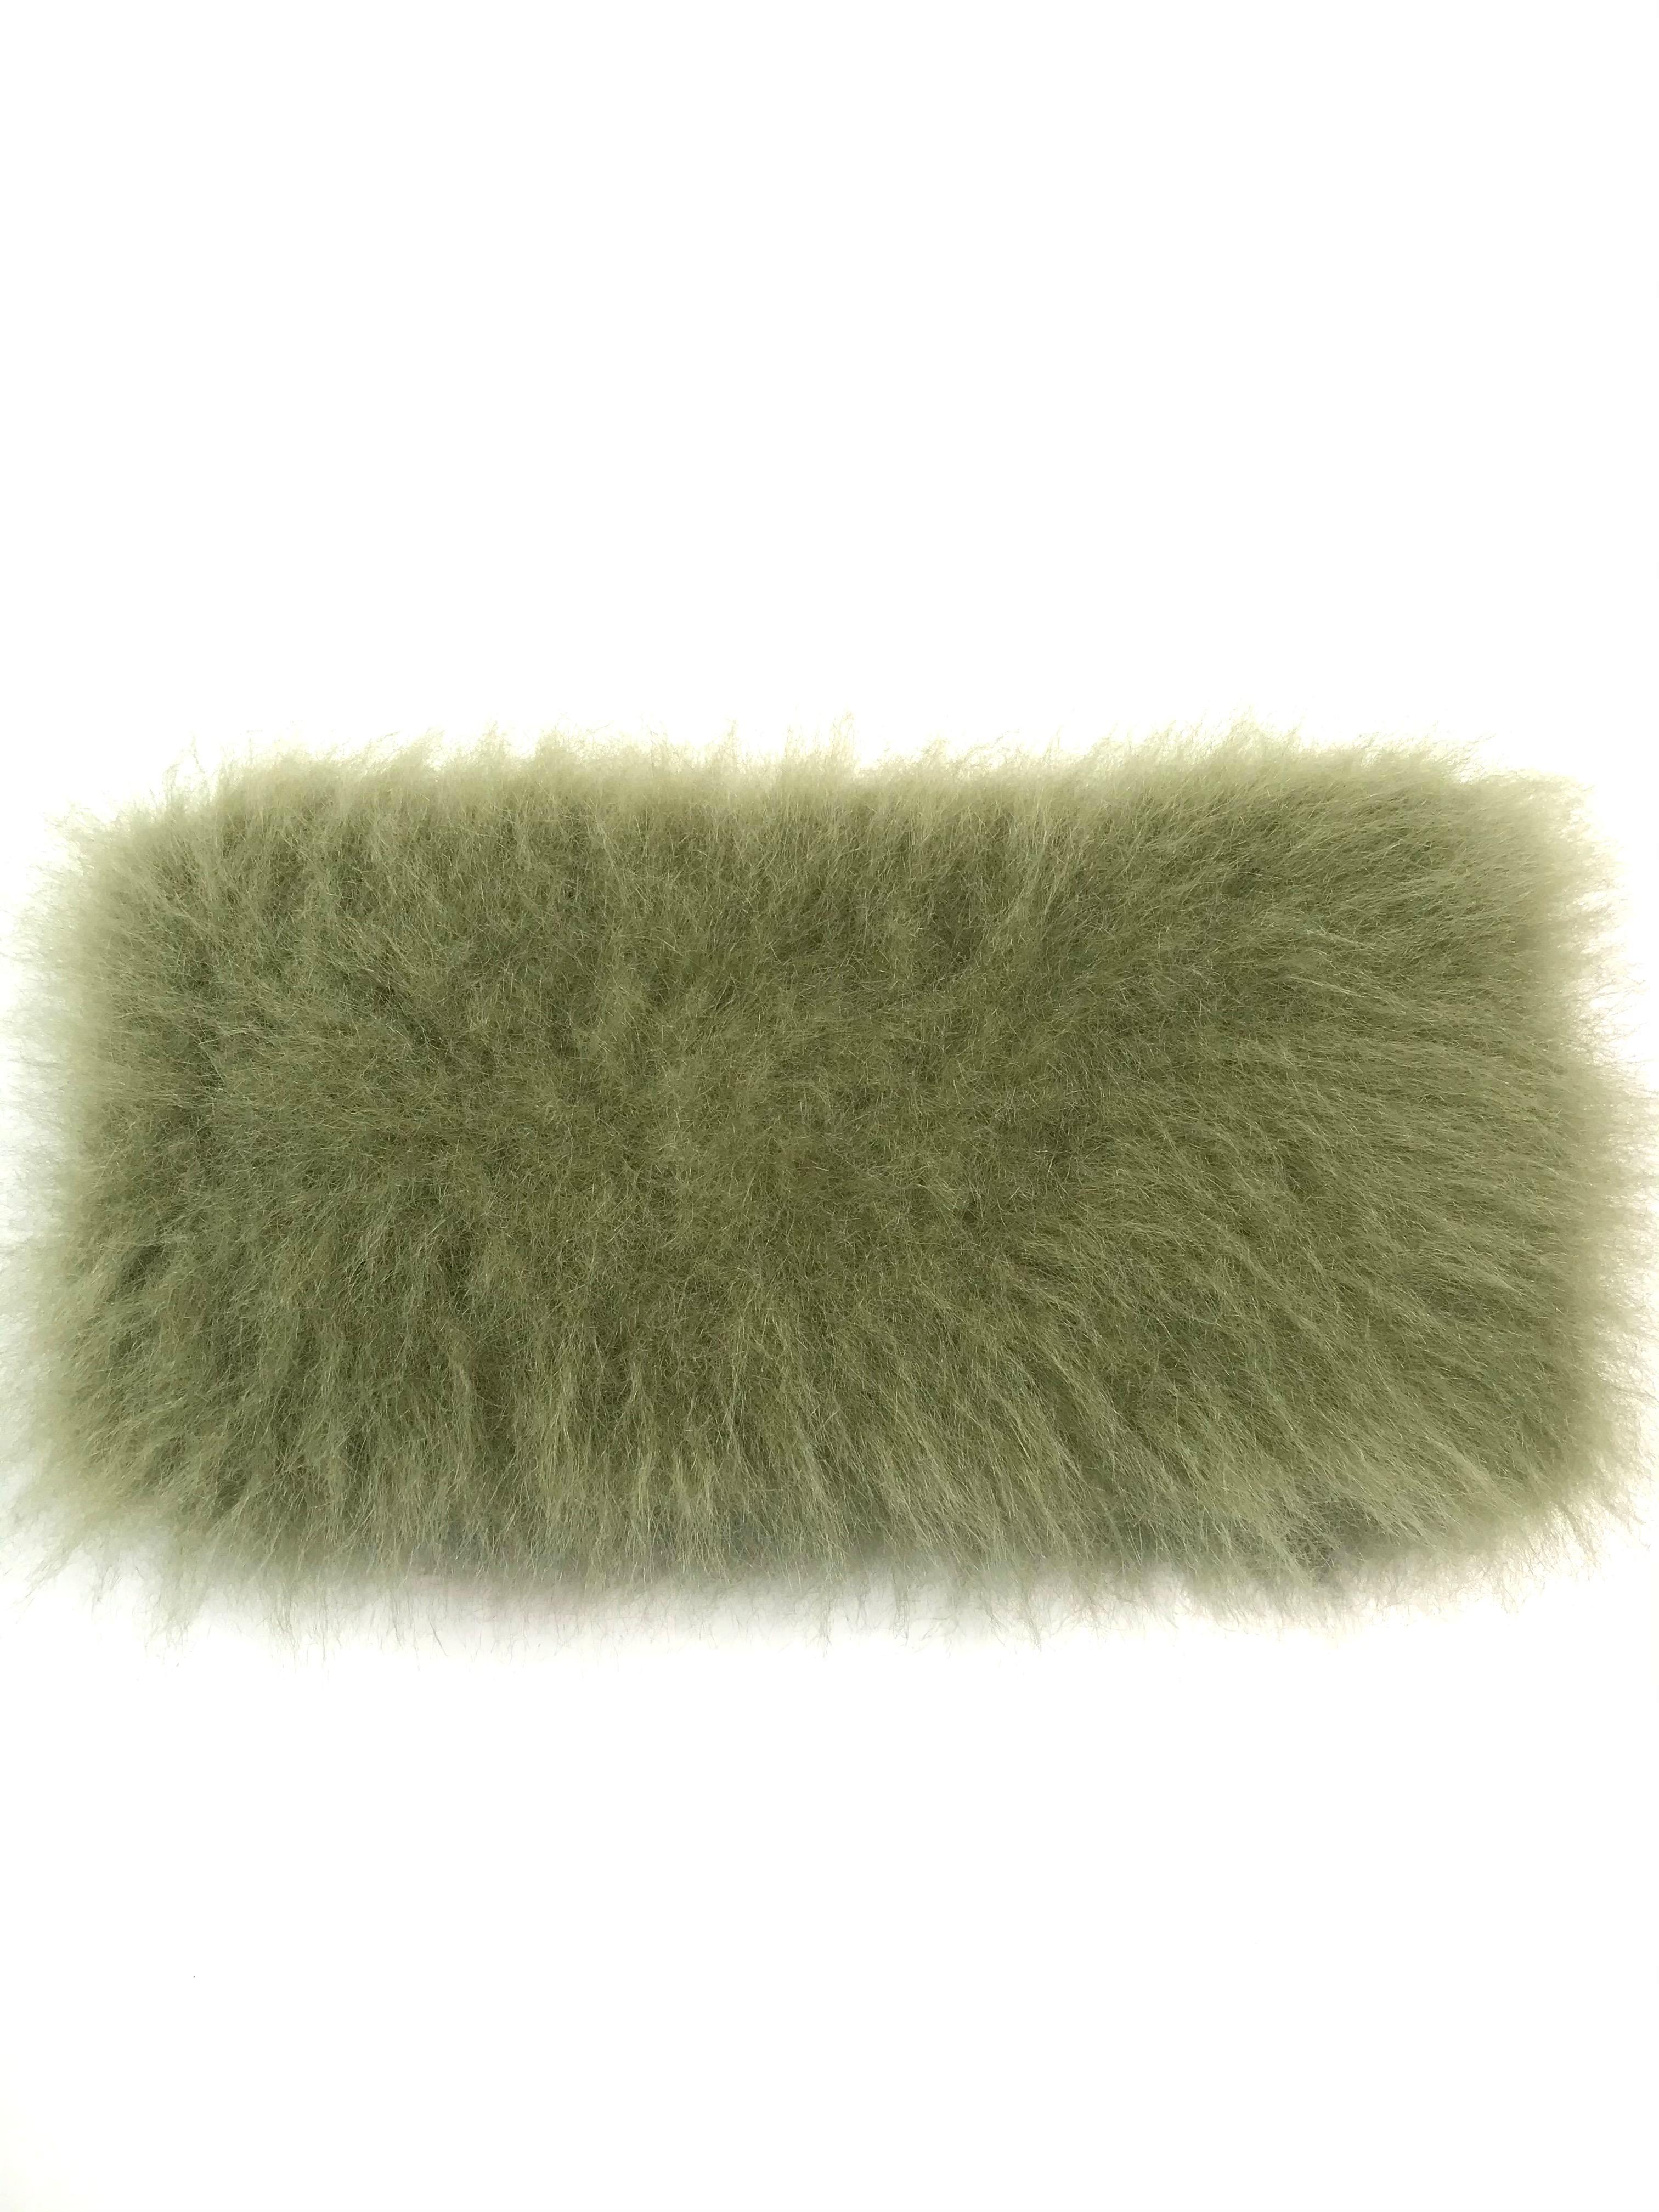 This beautiful pair of Pelush faux fur scarfs are sold as a set and they are one of a kind. Featuring the highest quality man made pelage, these soft and elegant neck warmer in green shades are a perfect replica of the chinchilla and alpaca fur.